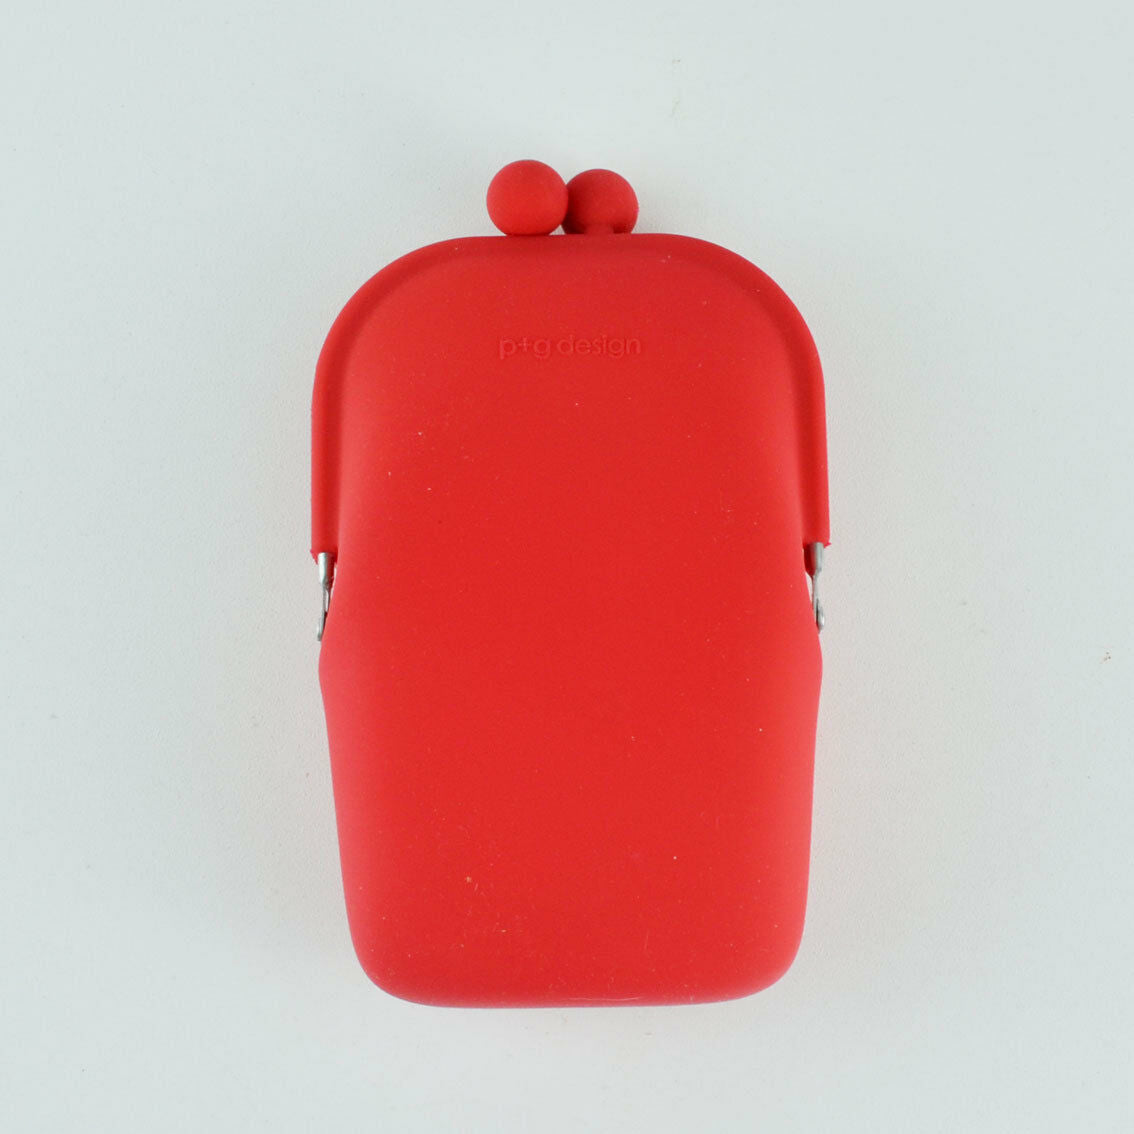 Silicone Purse - Wallet - Cell Phone Holder - POCH II P+G Designs - Red